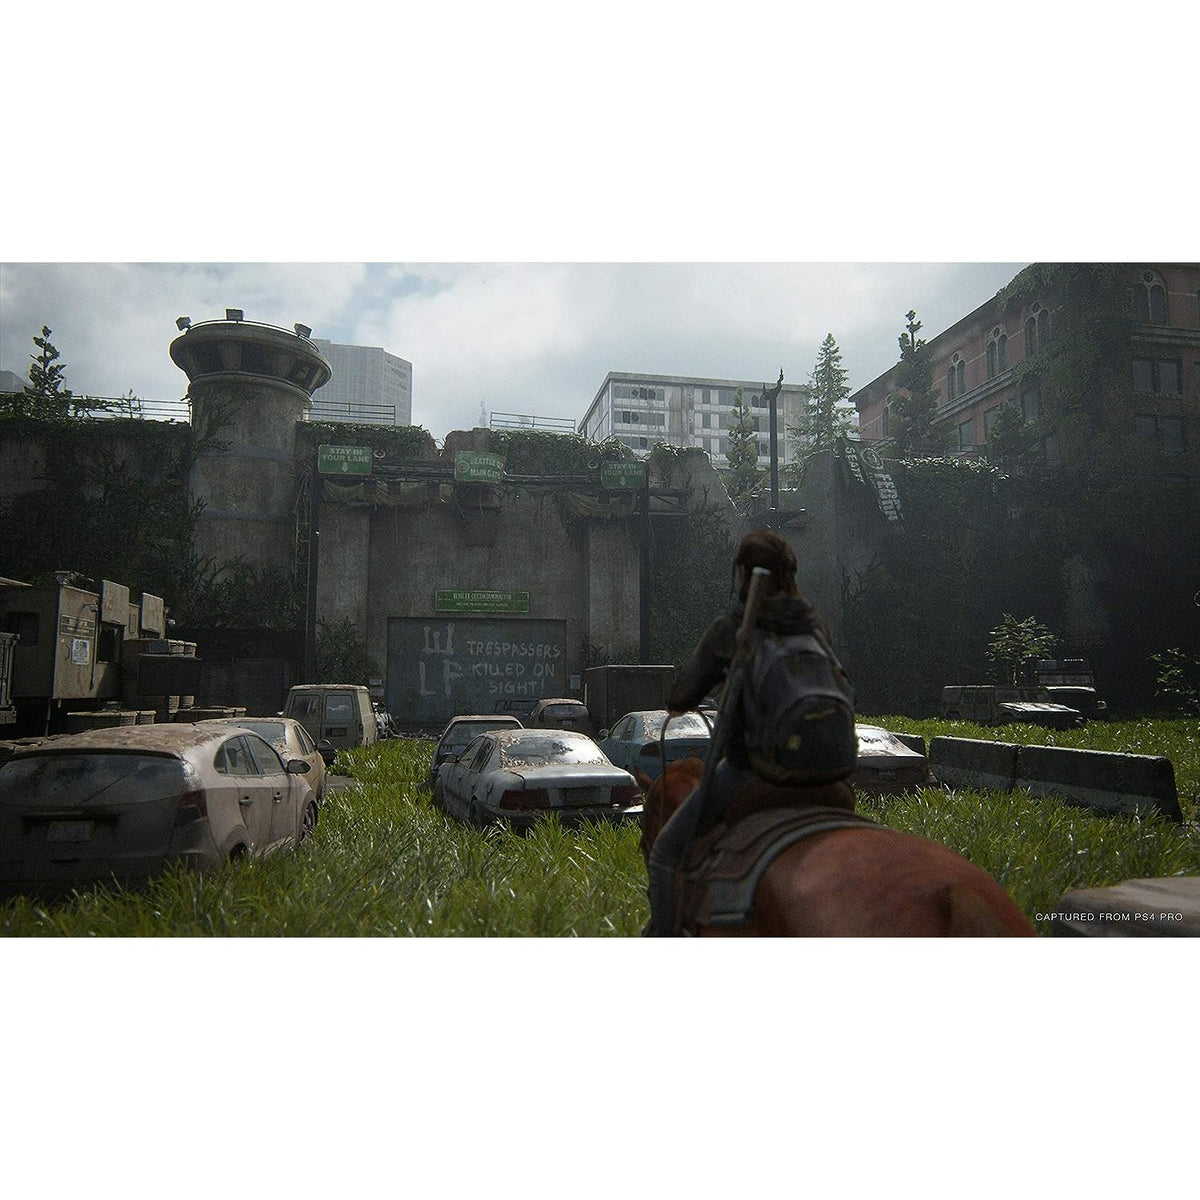 The Last of Us Part II - PS4 Games